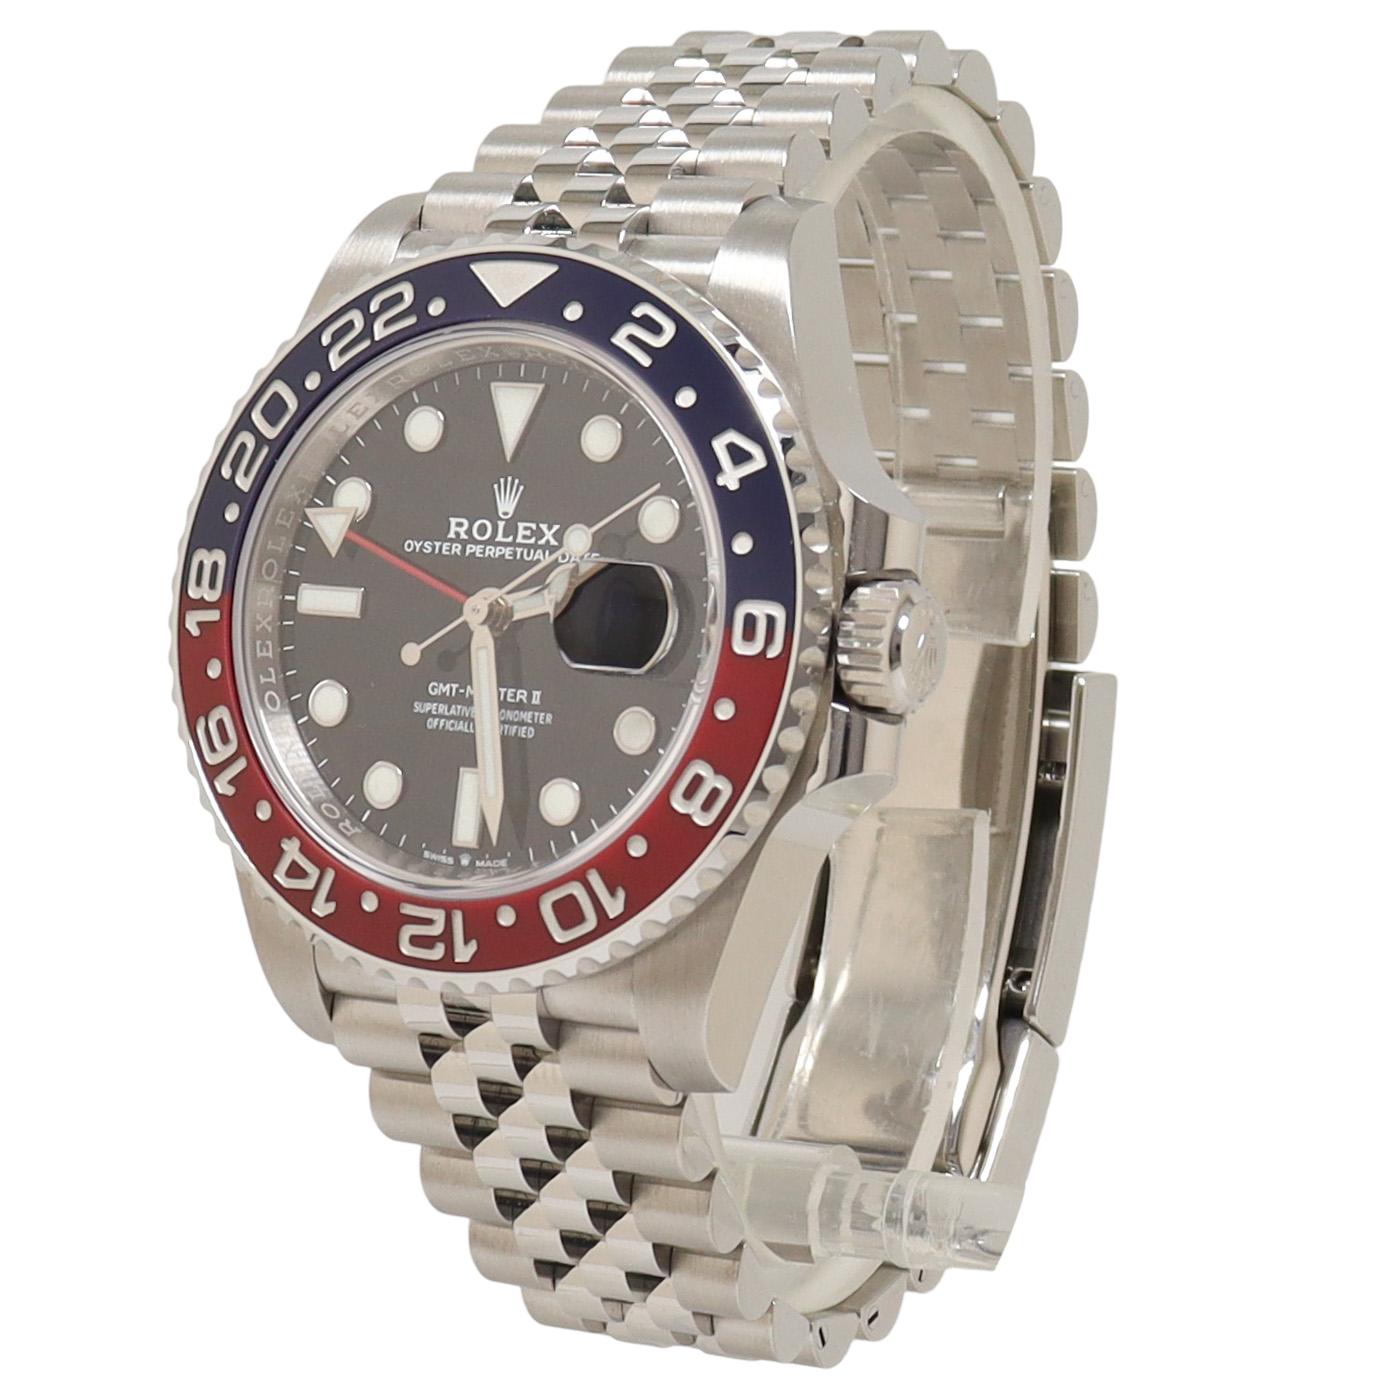 Rolex GMT Master II "Pepsi" Stainless Steel 40mm Black Dot Dial Watch Reference#: 126710BLRO